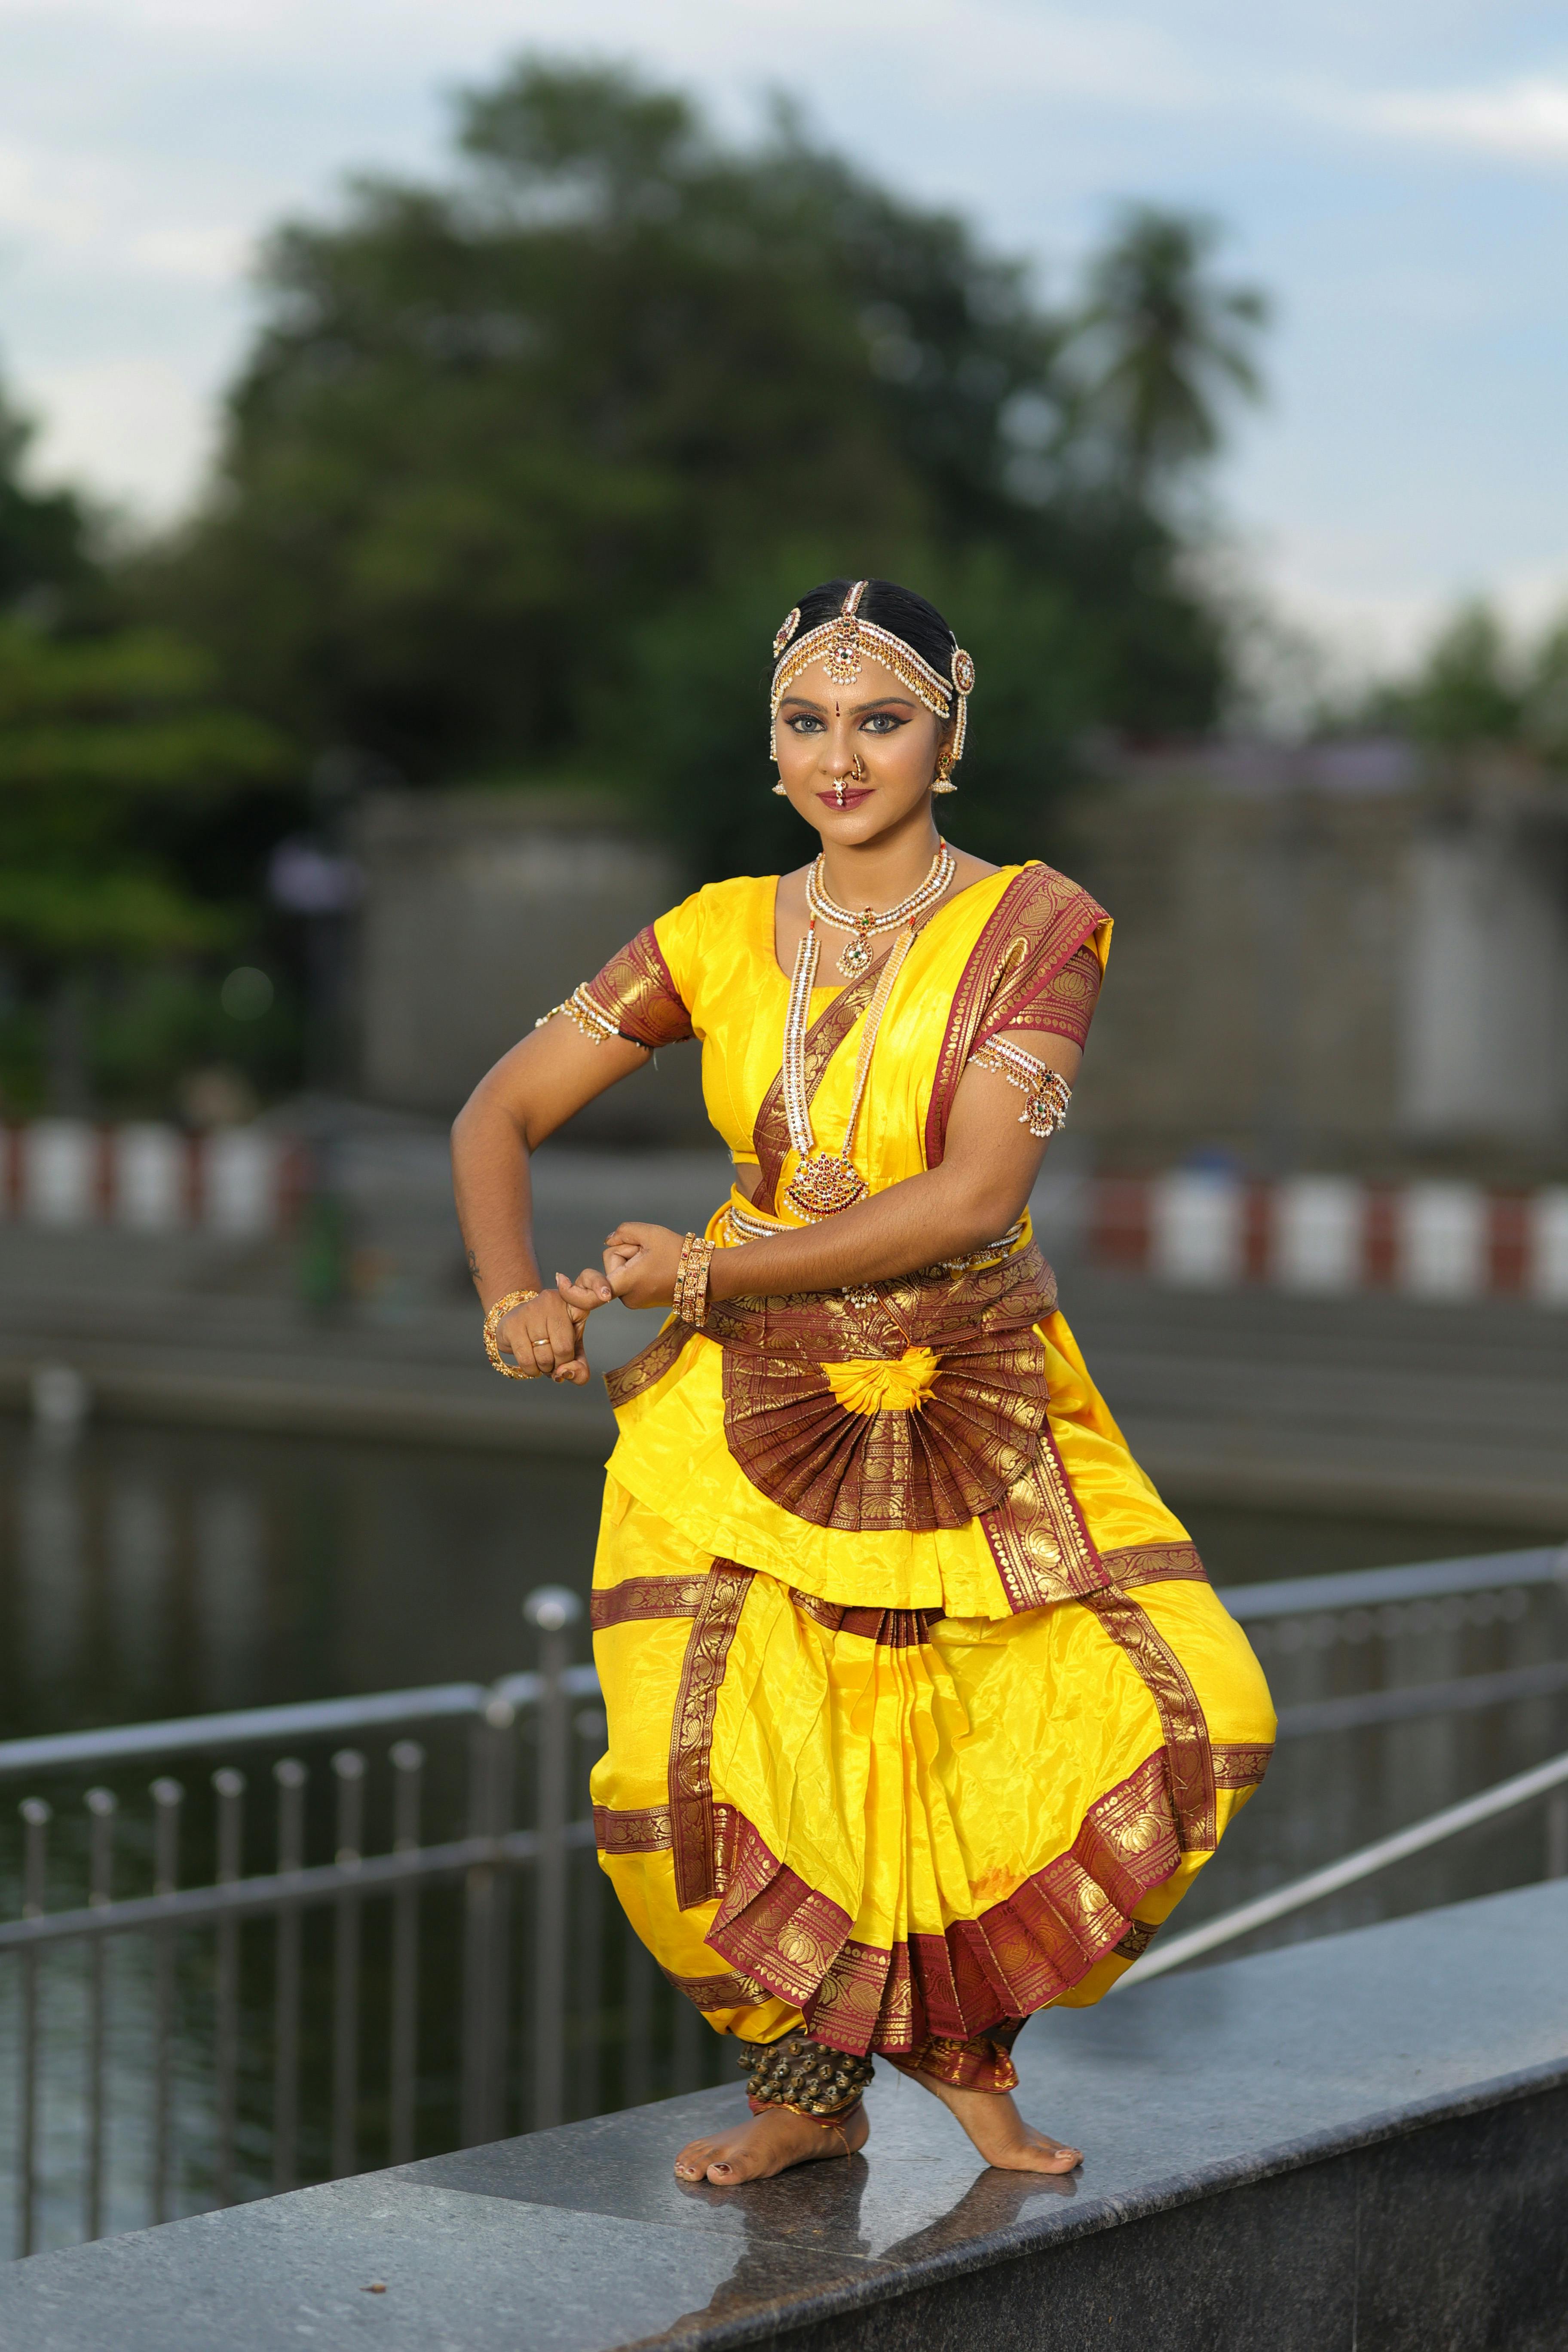 Dive into the mesmerizing world of Indian classical dance! LSR dancesoc was  thrilled to introduce MUDRA'23, our Indian Classical dance… | Instagram